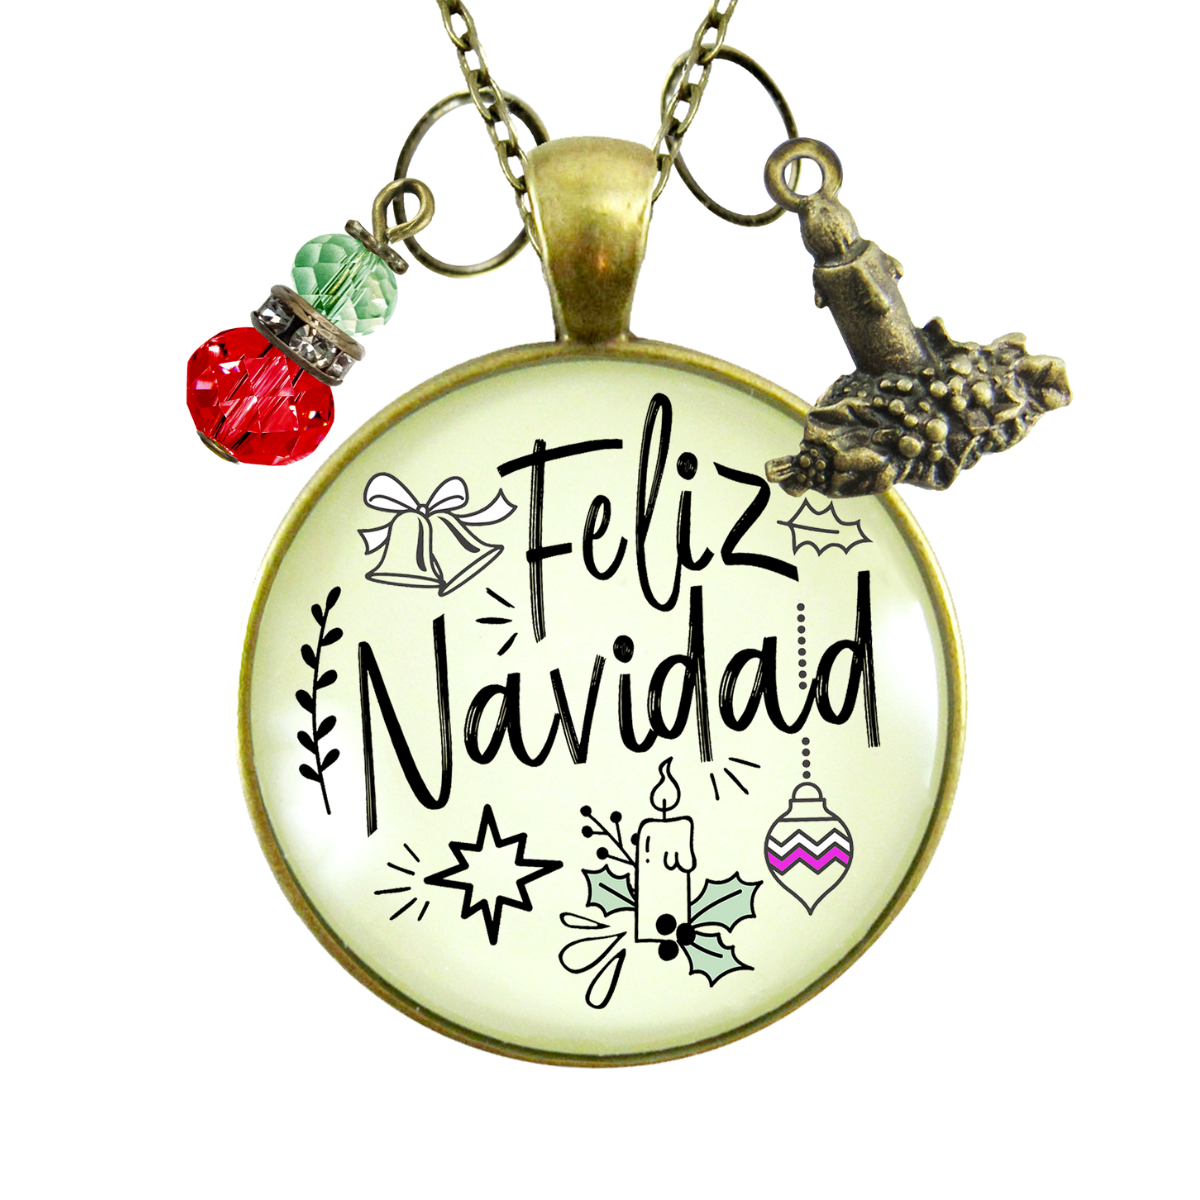 Feliz Navidad Necklace Merry Christmas Gift Jewelry For Her Candle Charm Red Green Beads Holiday Pendant  Necklace - Gutsy Goodness Handmade Jewelry